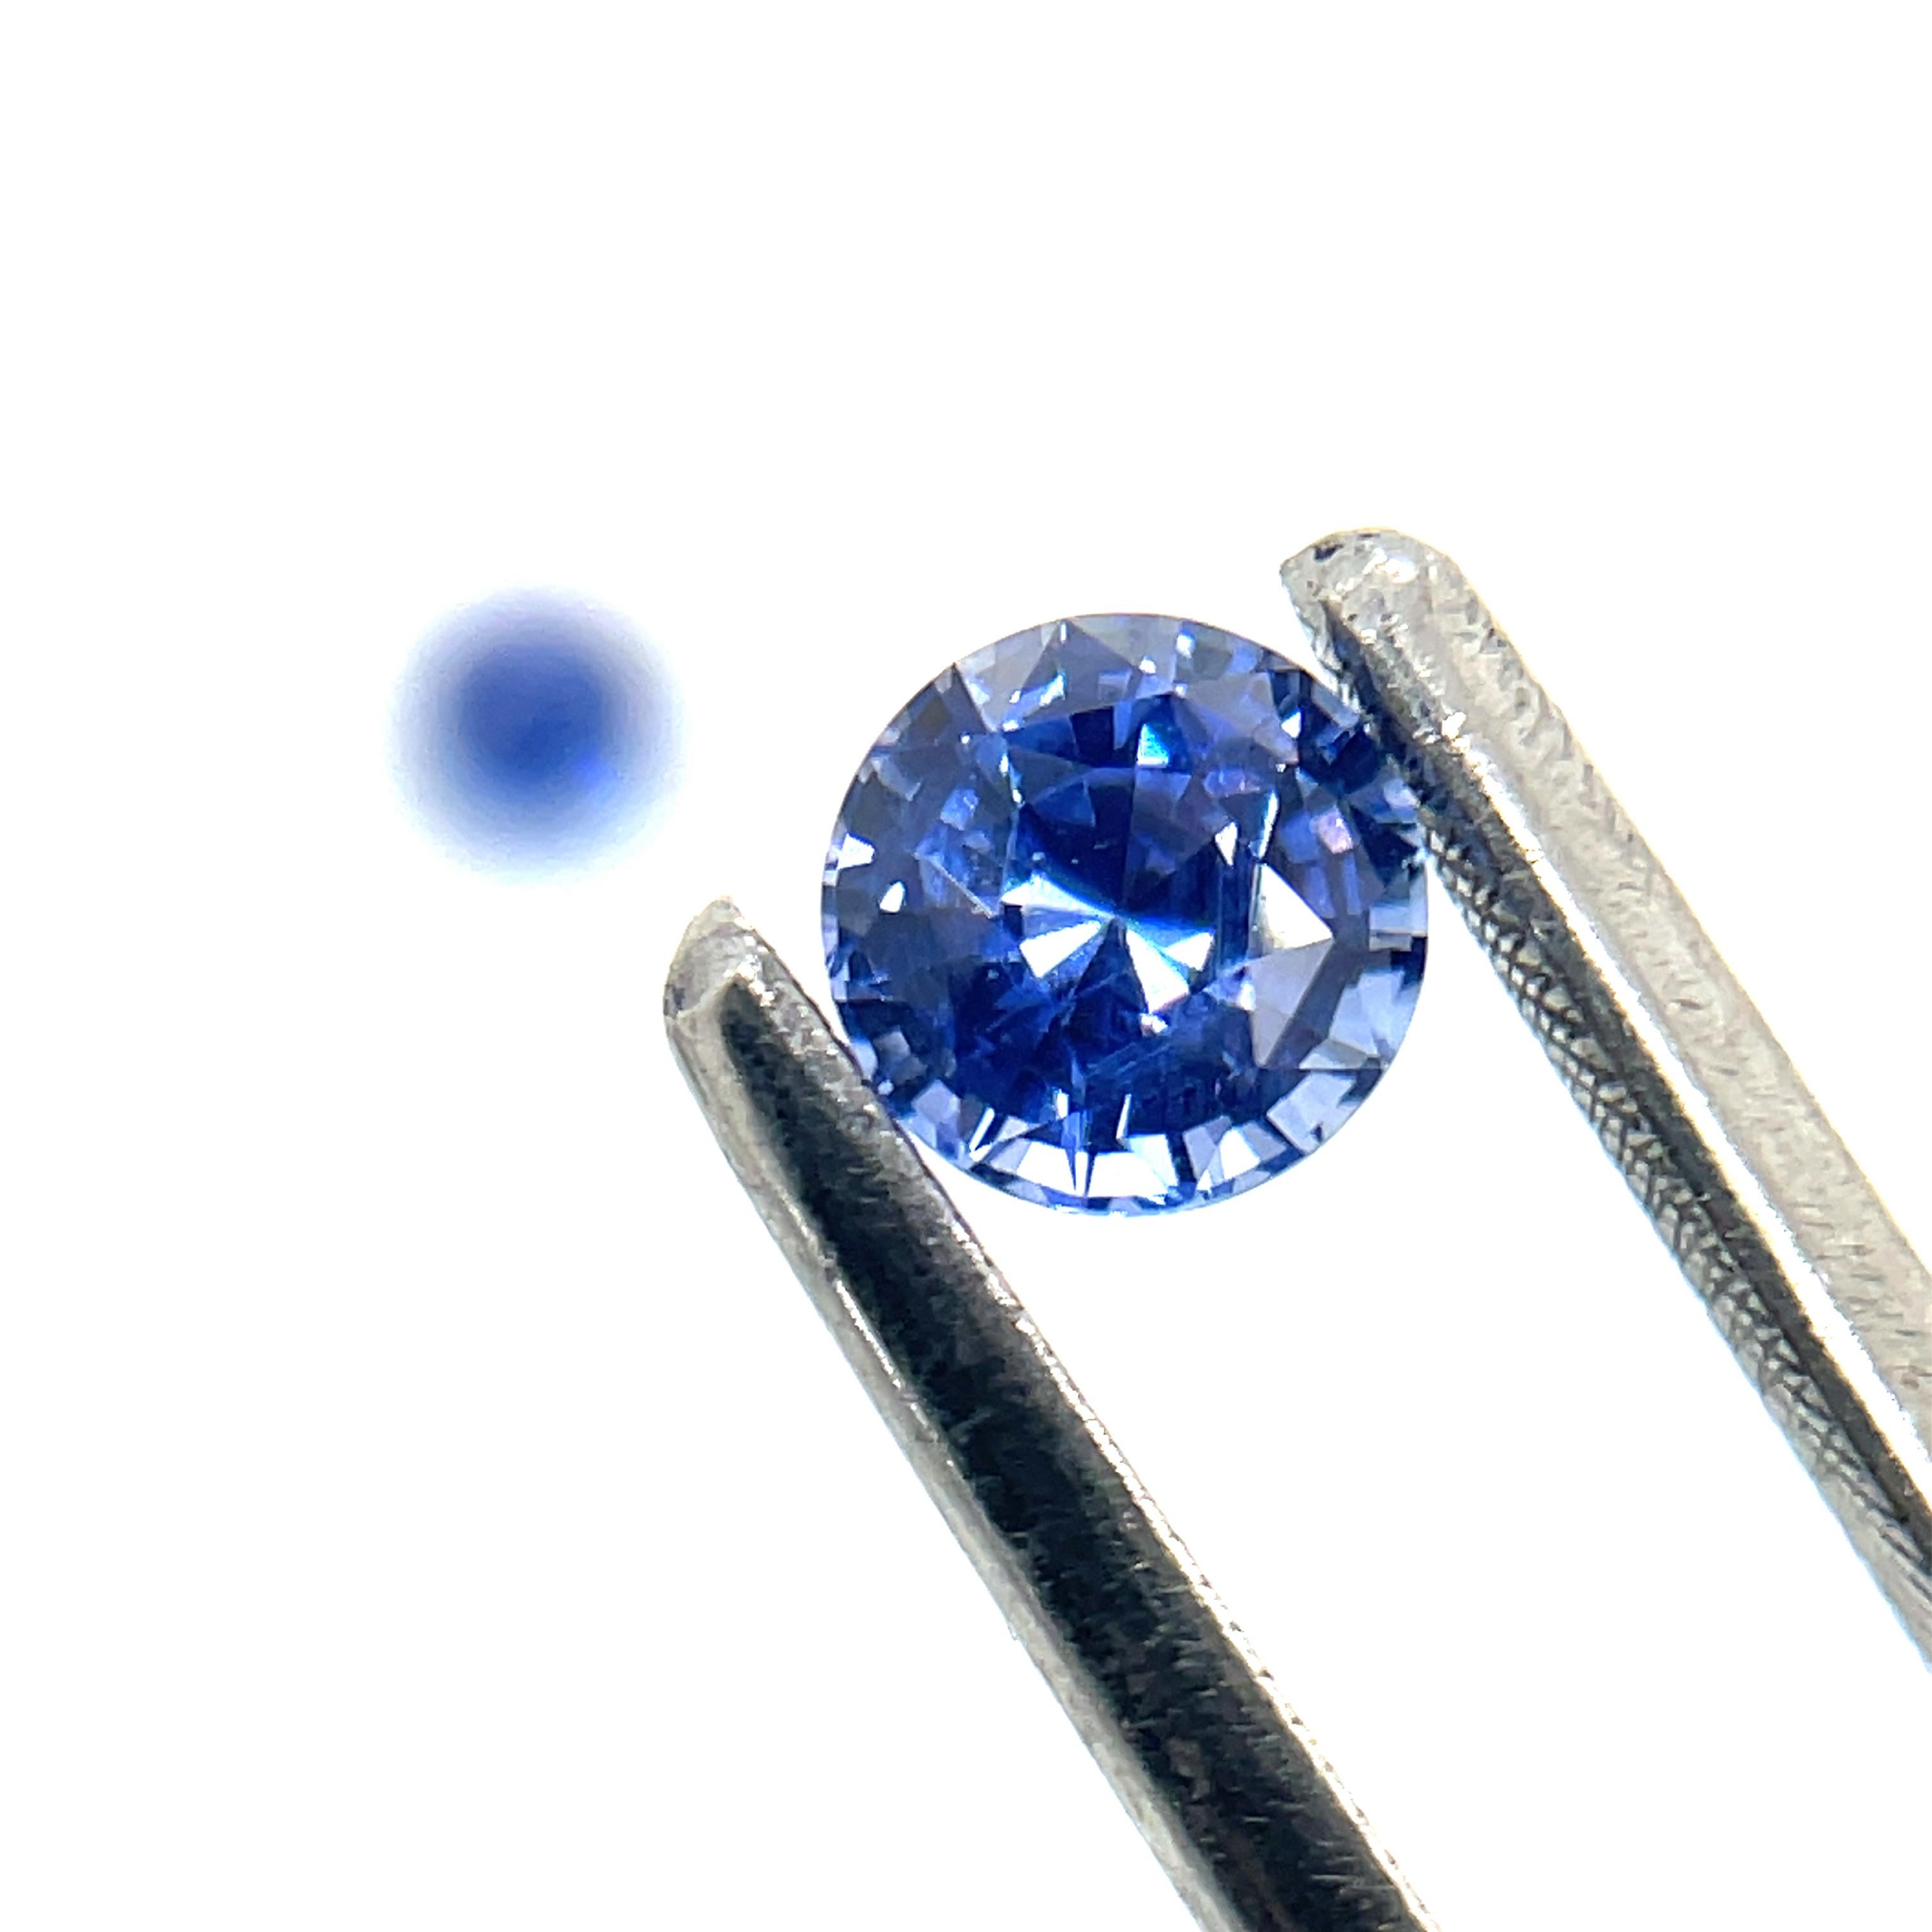 2 Natural Round Diamond-Cut Blue Sapphires Cts 1.21 In New Condition For Sale In Hong Kong, HK